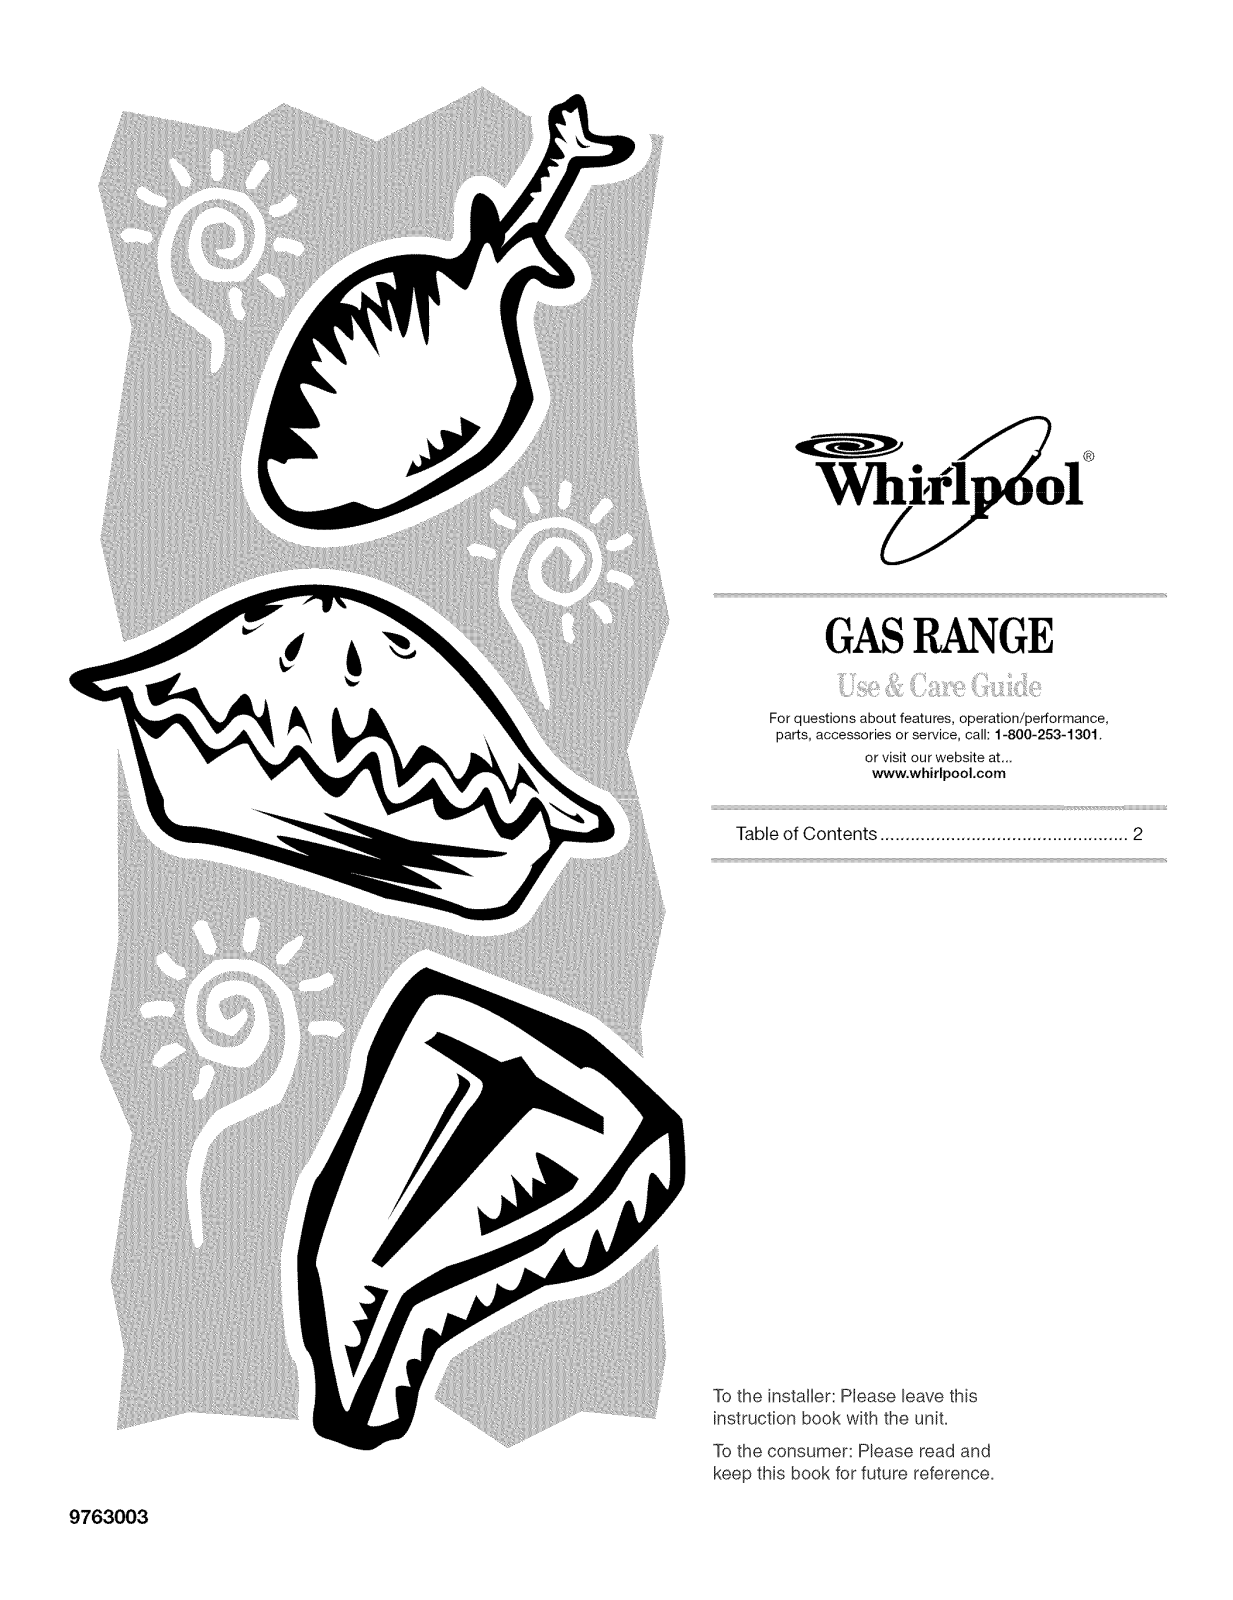 Whirlpool GS773LXSS0, SF462LXST0, SF262LXSB0, SF262LXSQ0, SF262LXST0 Owner’s Manual